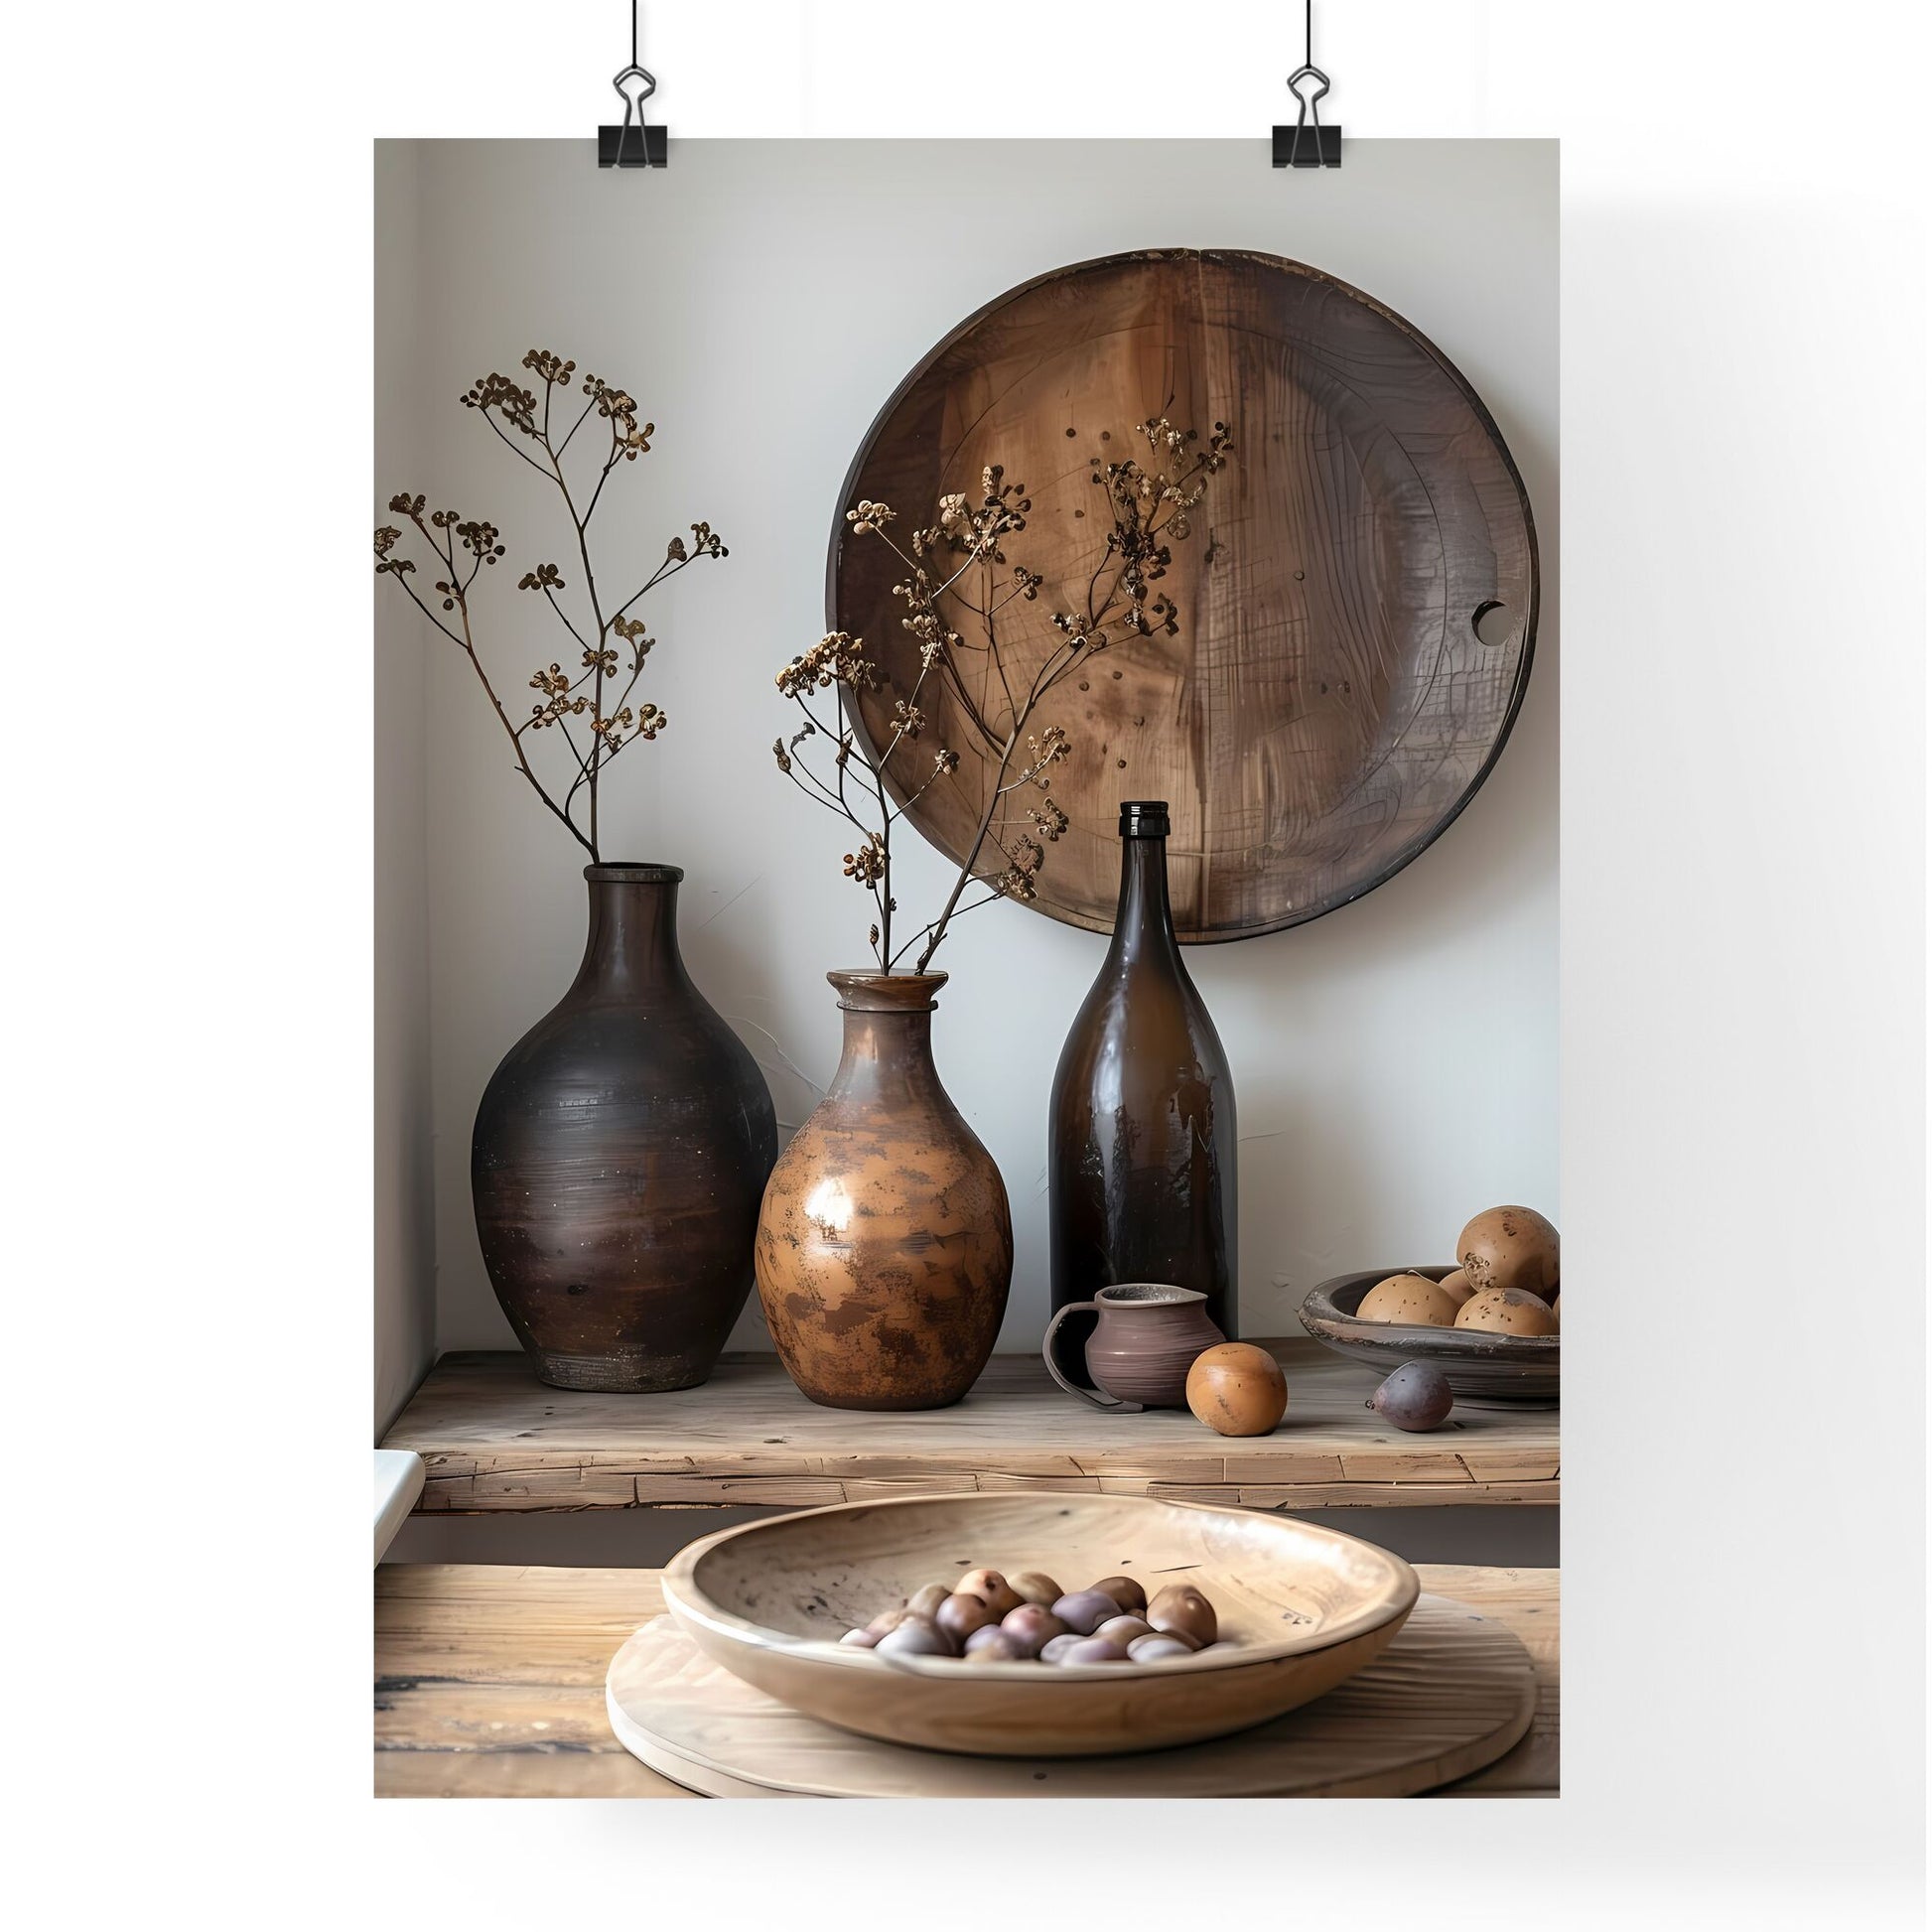 Minimalistic American Retro Style: Vases and Bowls on a Table with Vintage Vibe and Timeless Nostalgia Default Title